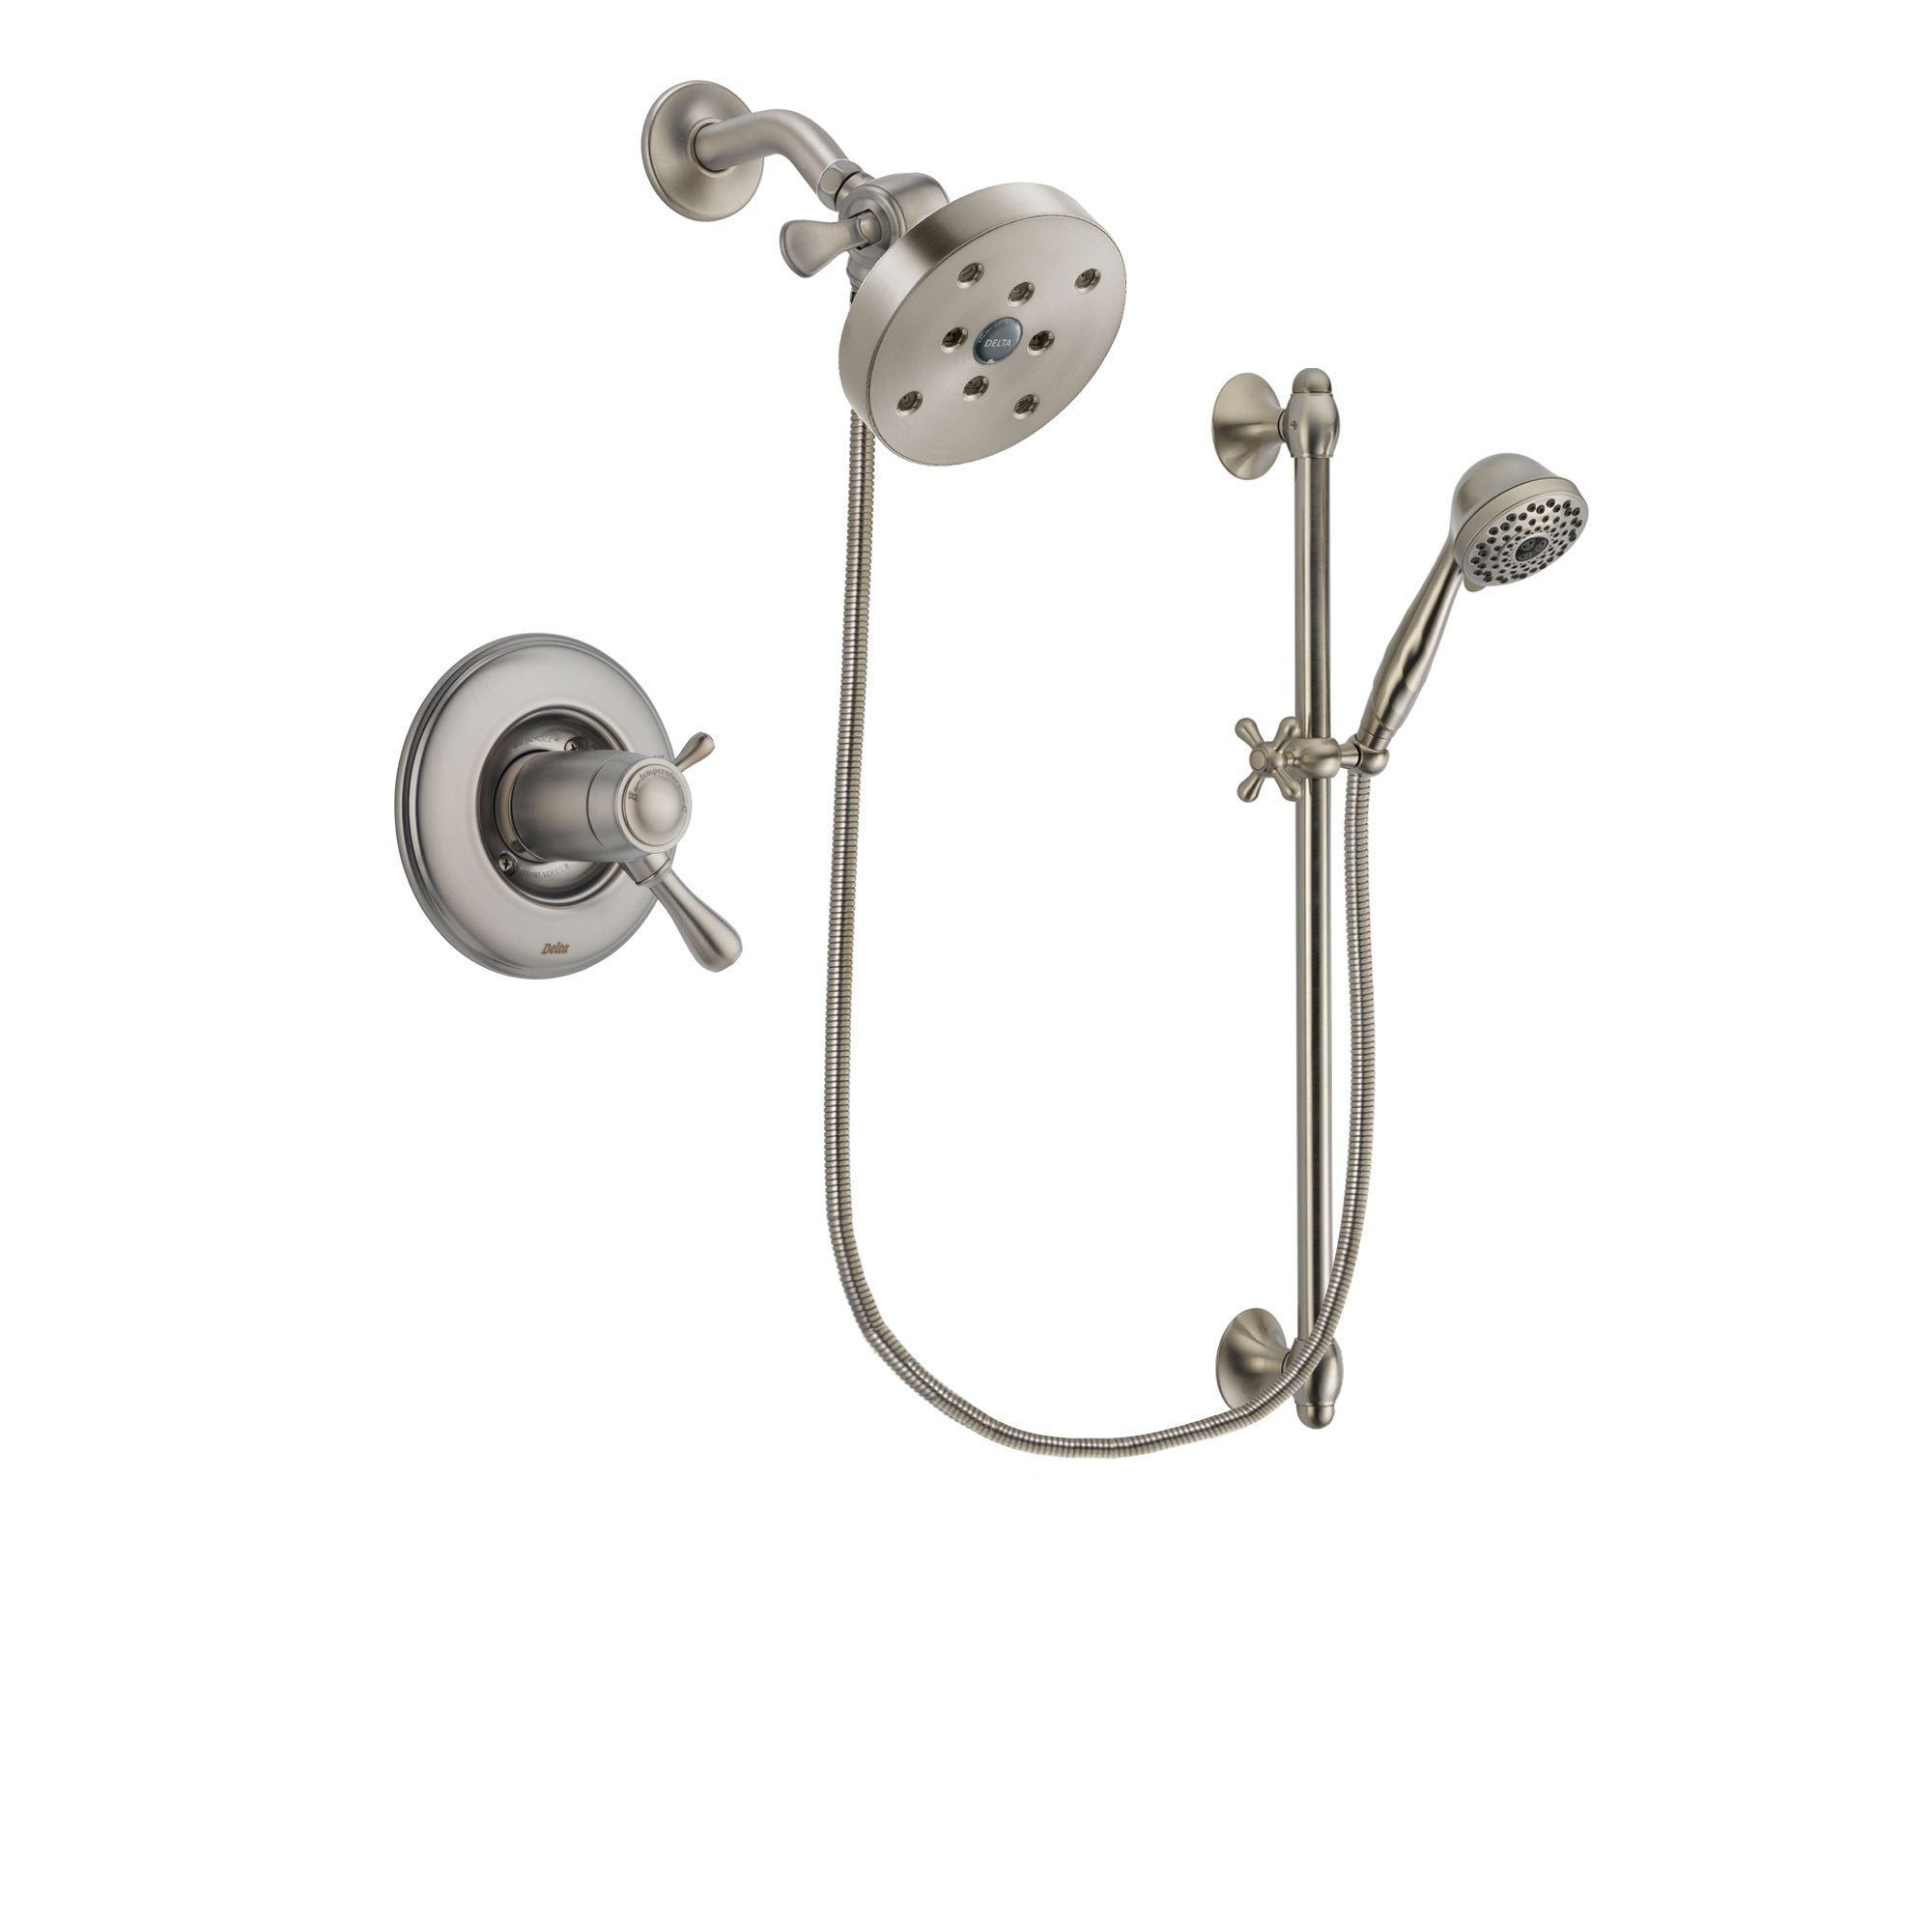 Delta Leland Stainless Steel Finish Thermostatic Shower Faucet System Package with 5-1/2 inch Shower Head and 7-Spray Handheld Shower with Slide Bar Includes Rough-in Valve DSP1756V